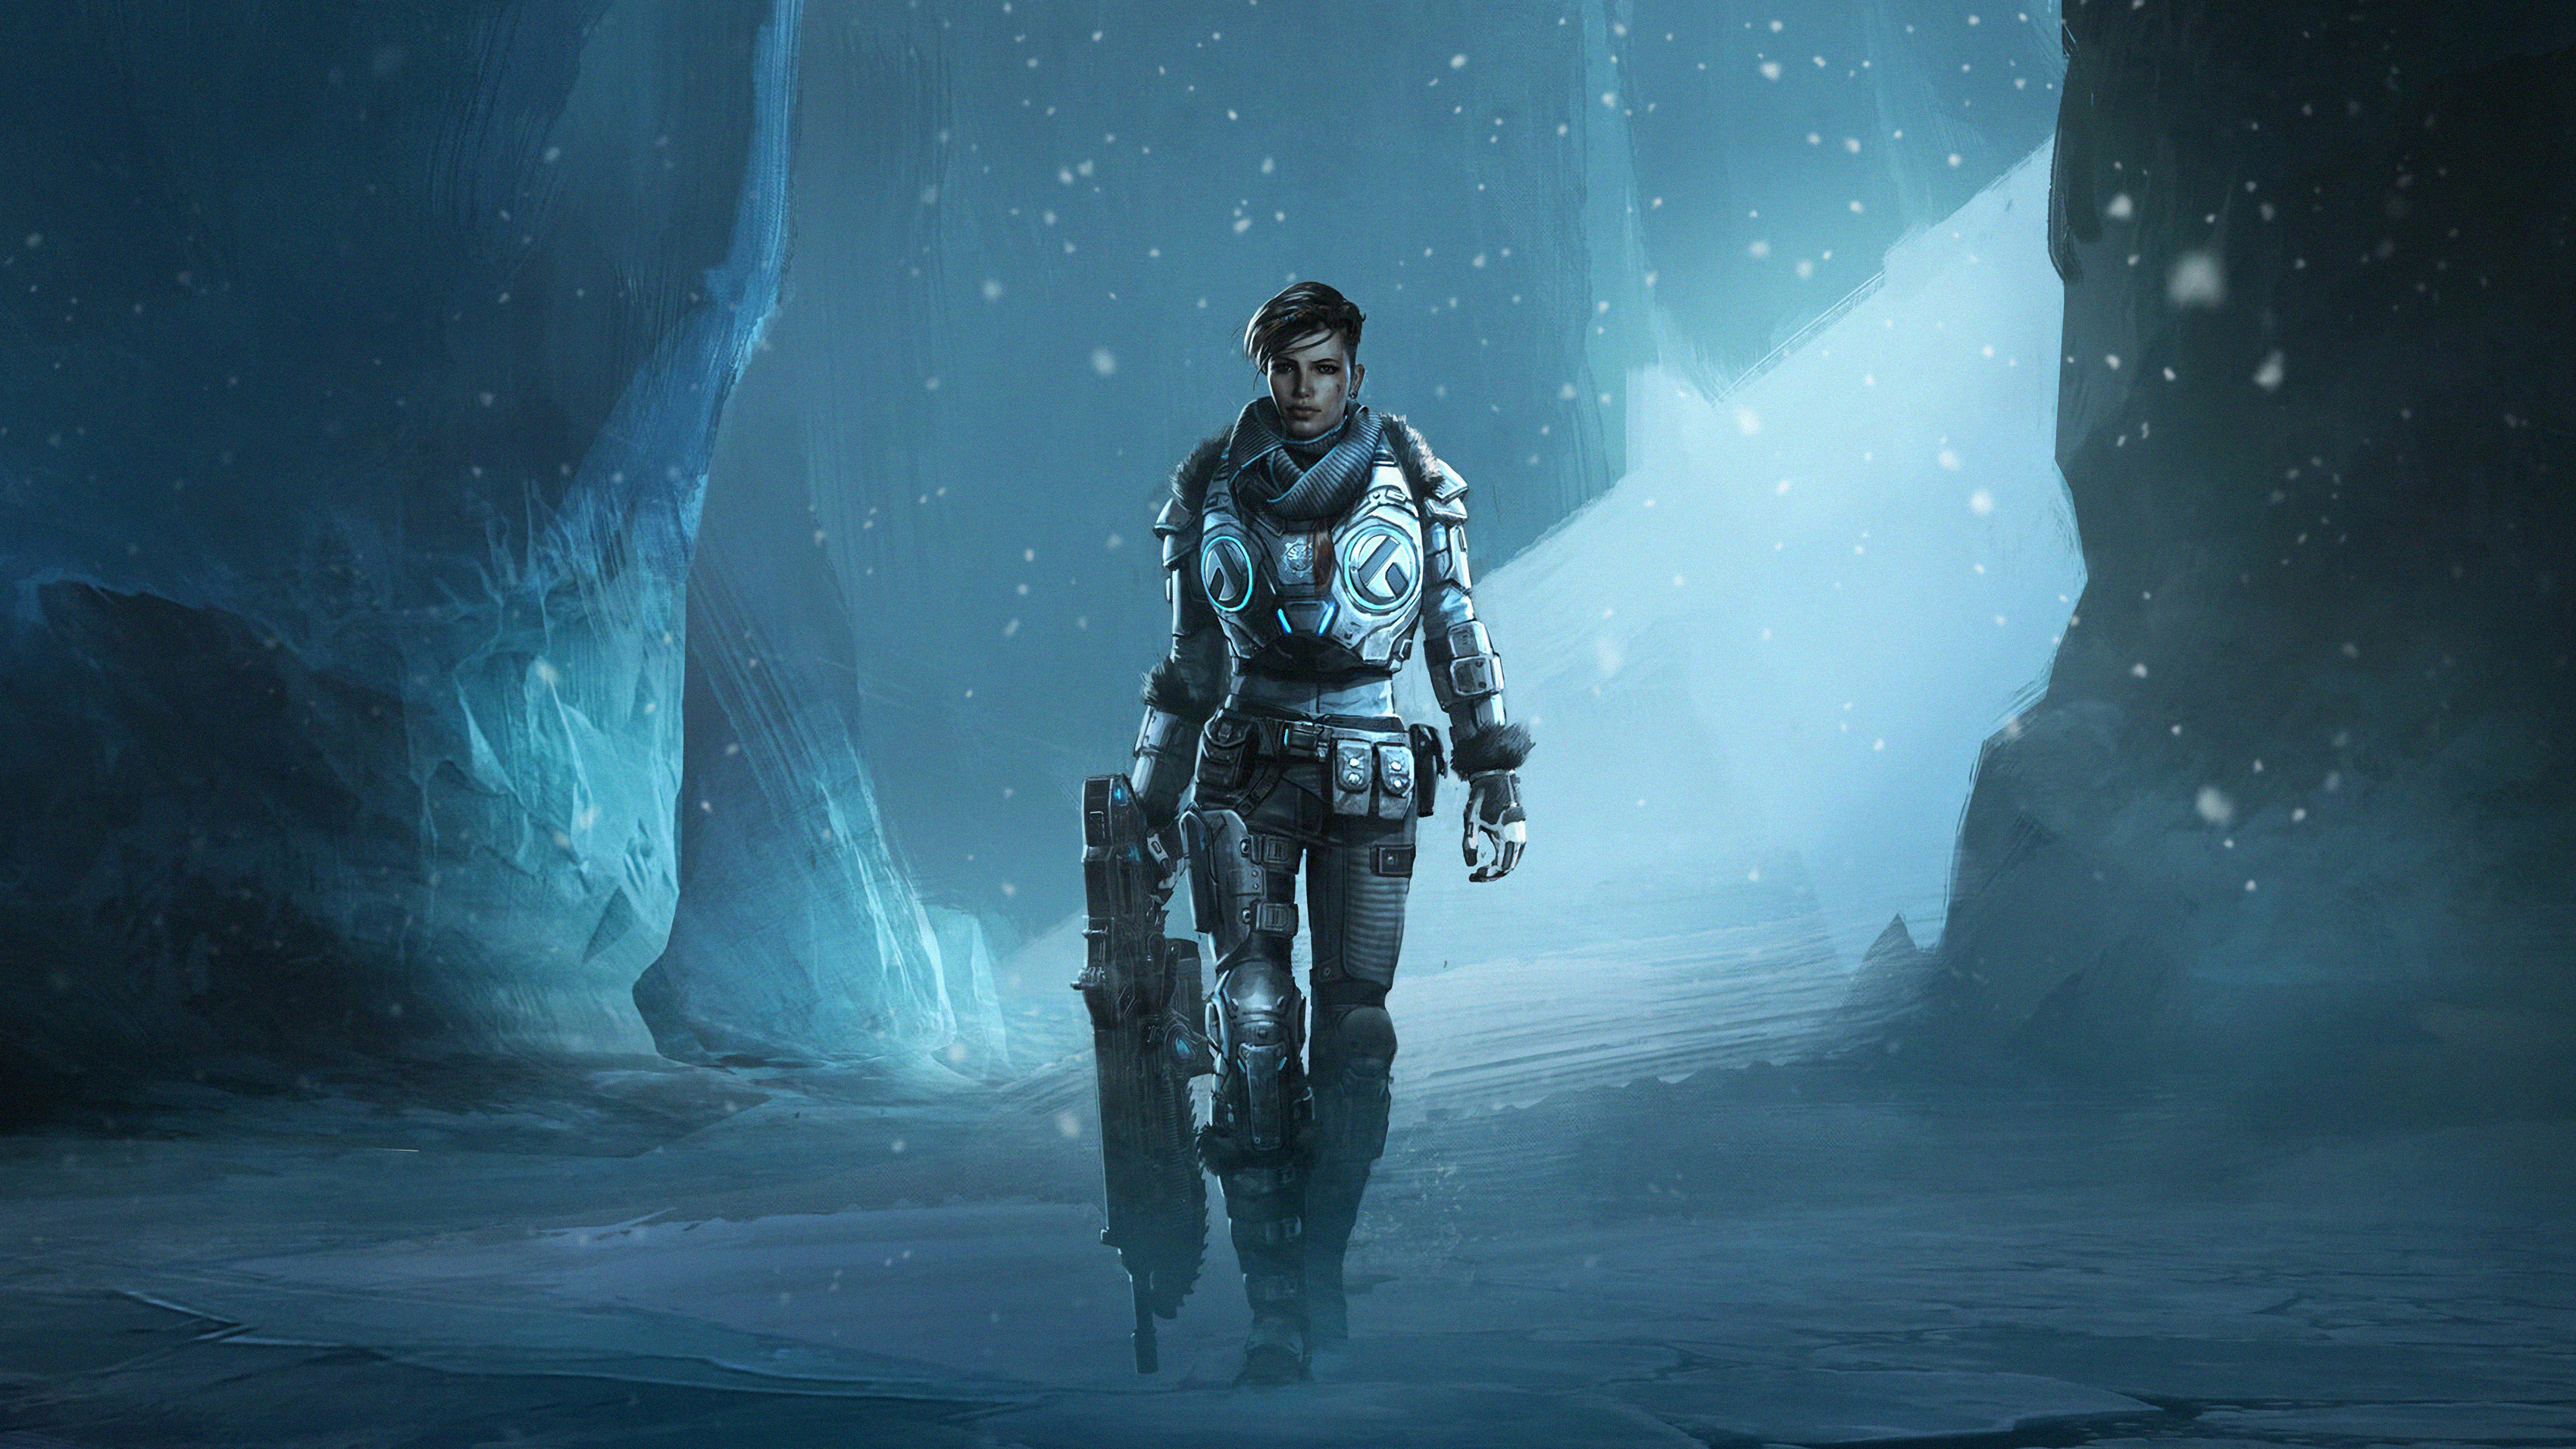 Video Game Gears 5 HD Wallpaper | Background Image